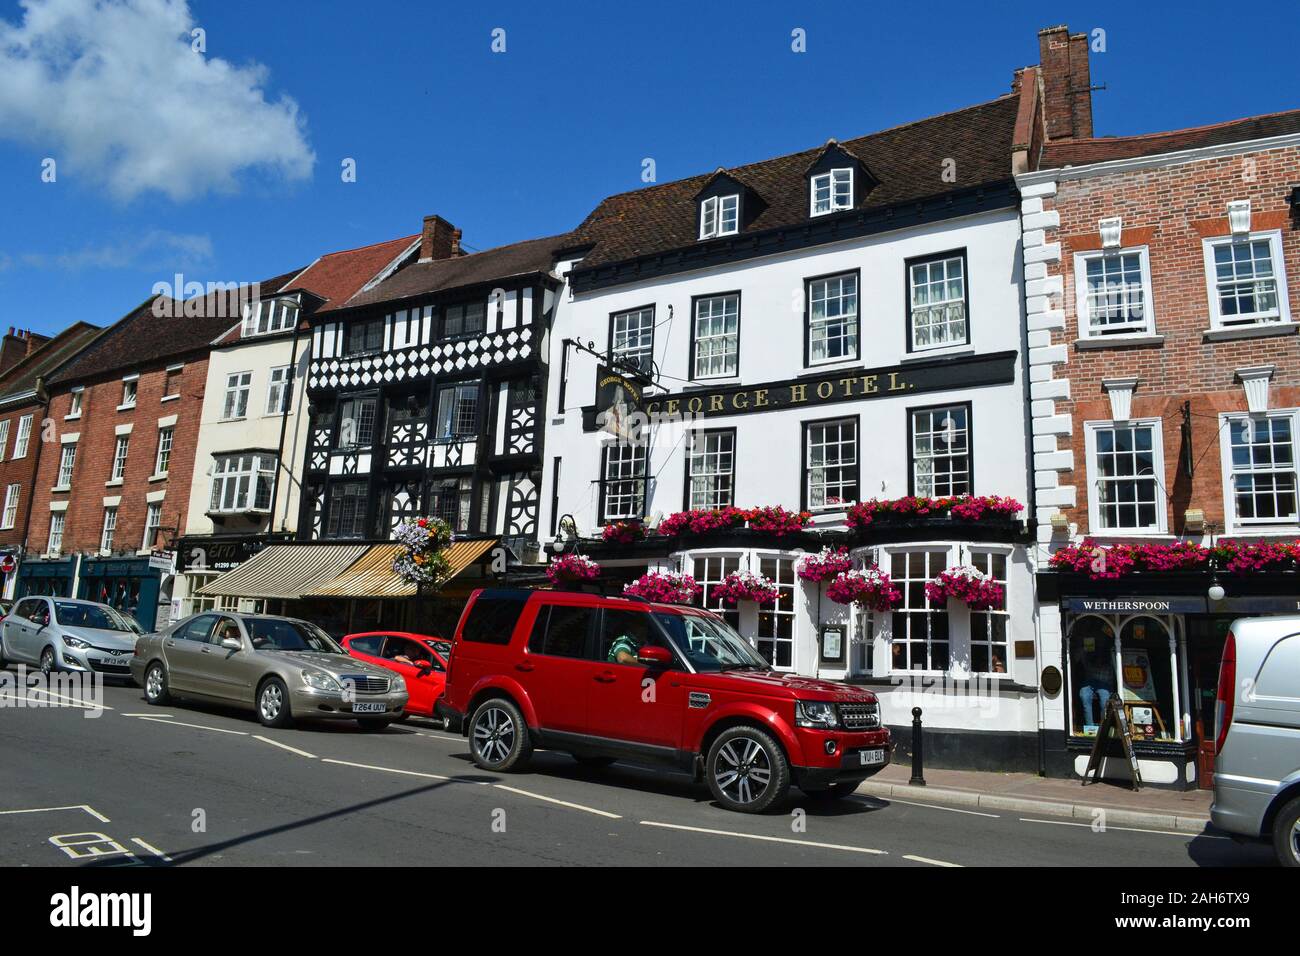 The George Hotel, Bewdley, Worcestershire Stock Photo